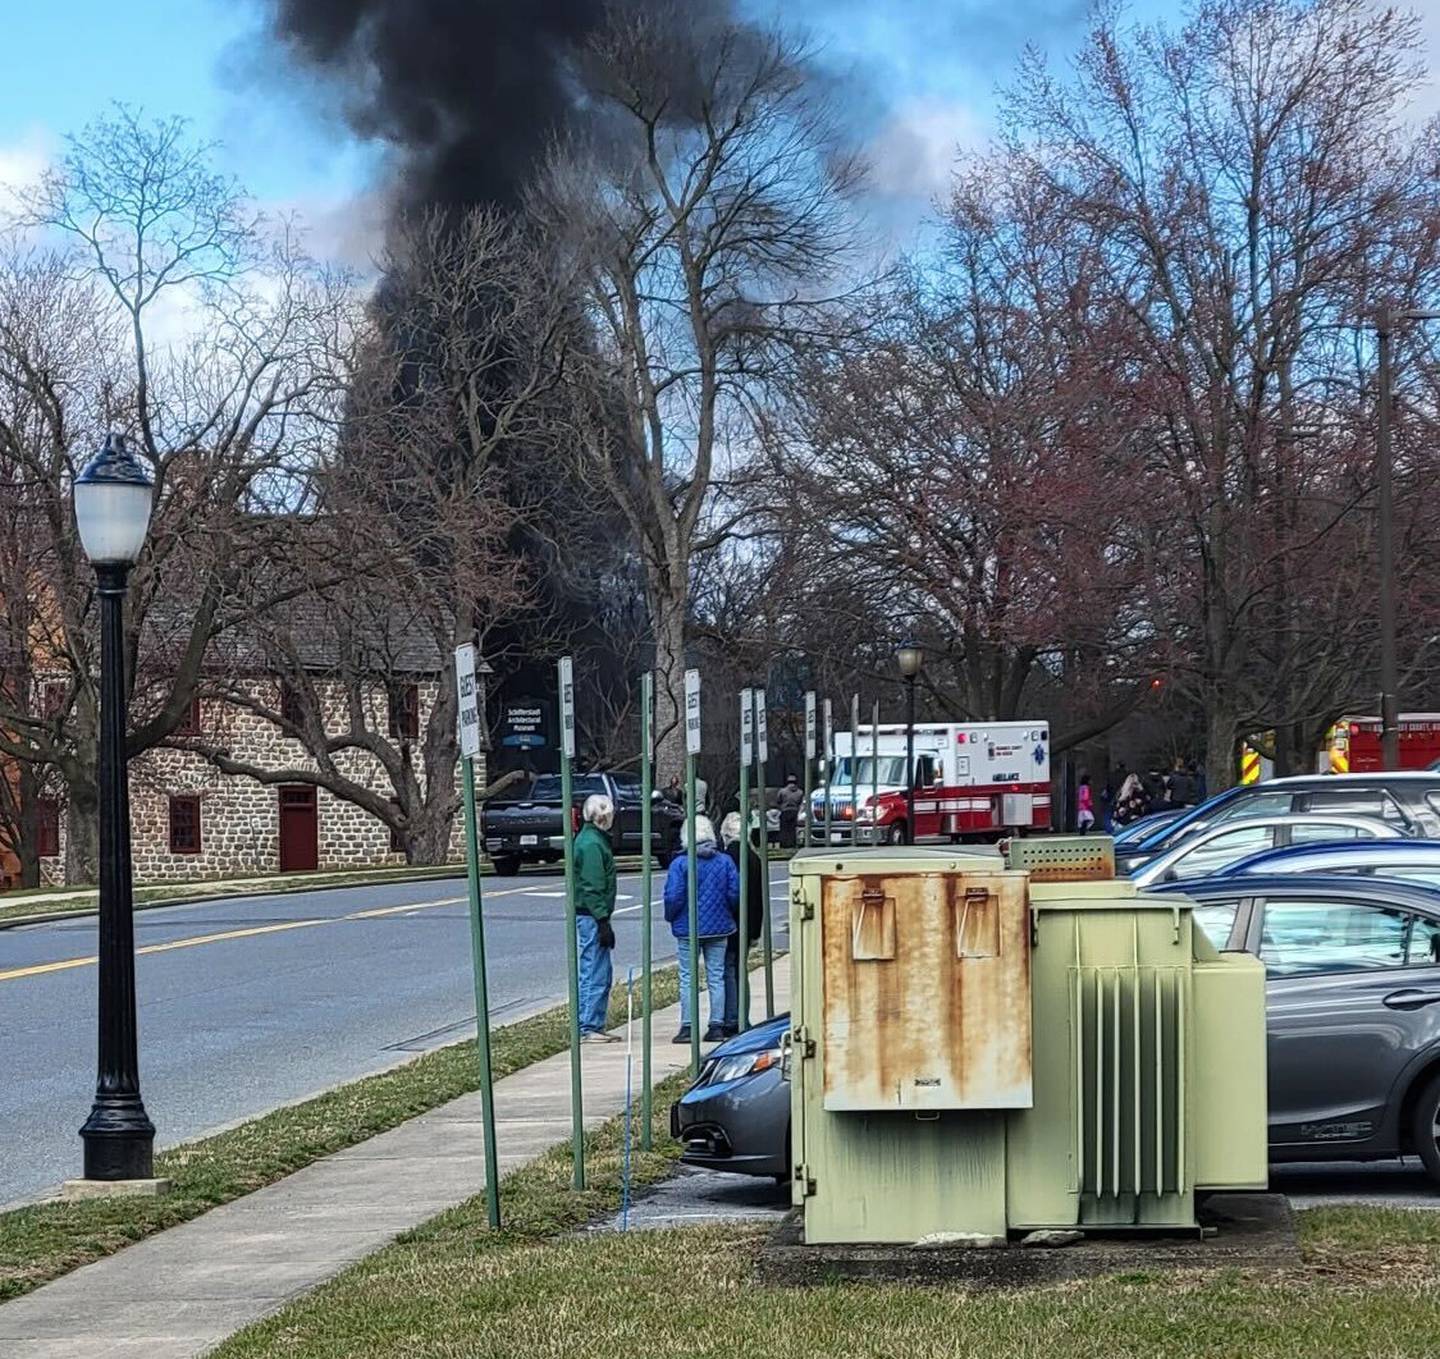 Black smoke rises over Frederick after a tanker truck overturned and caught fire on U.S. 15.